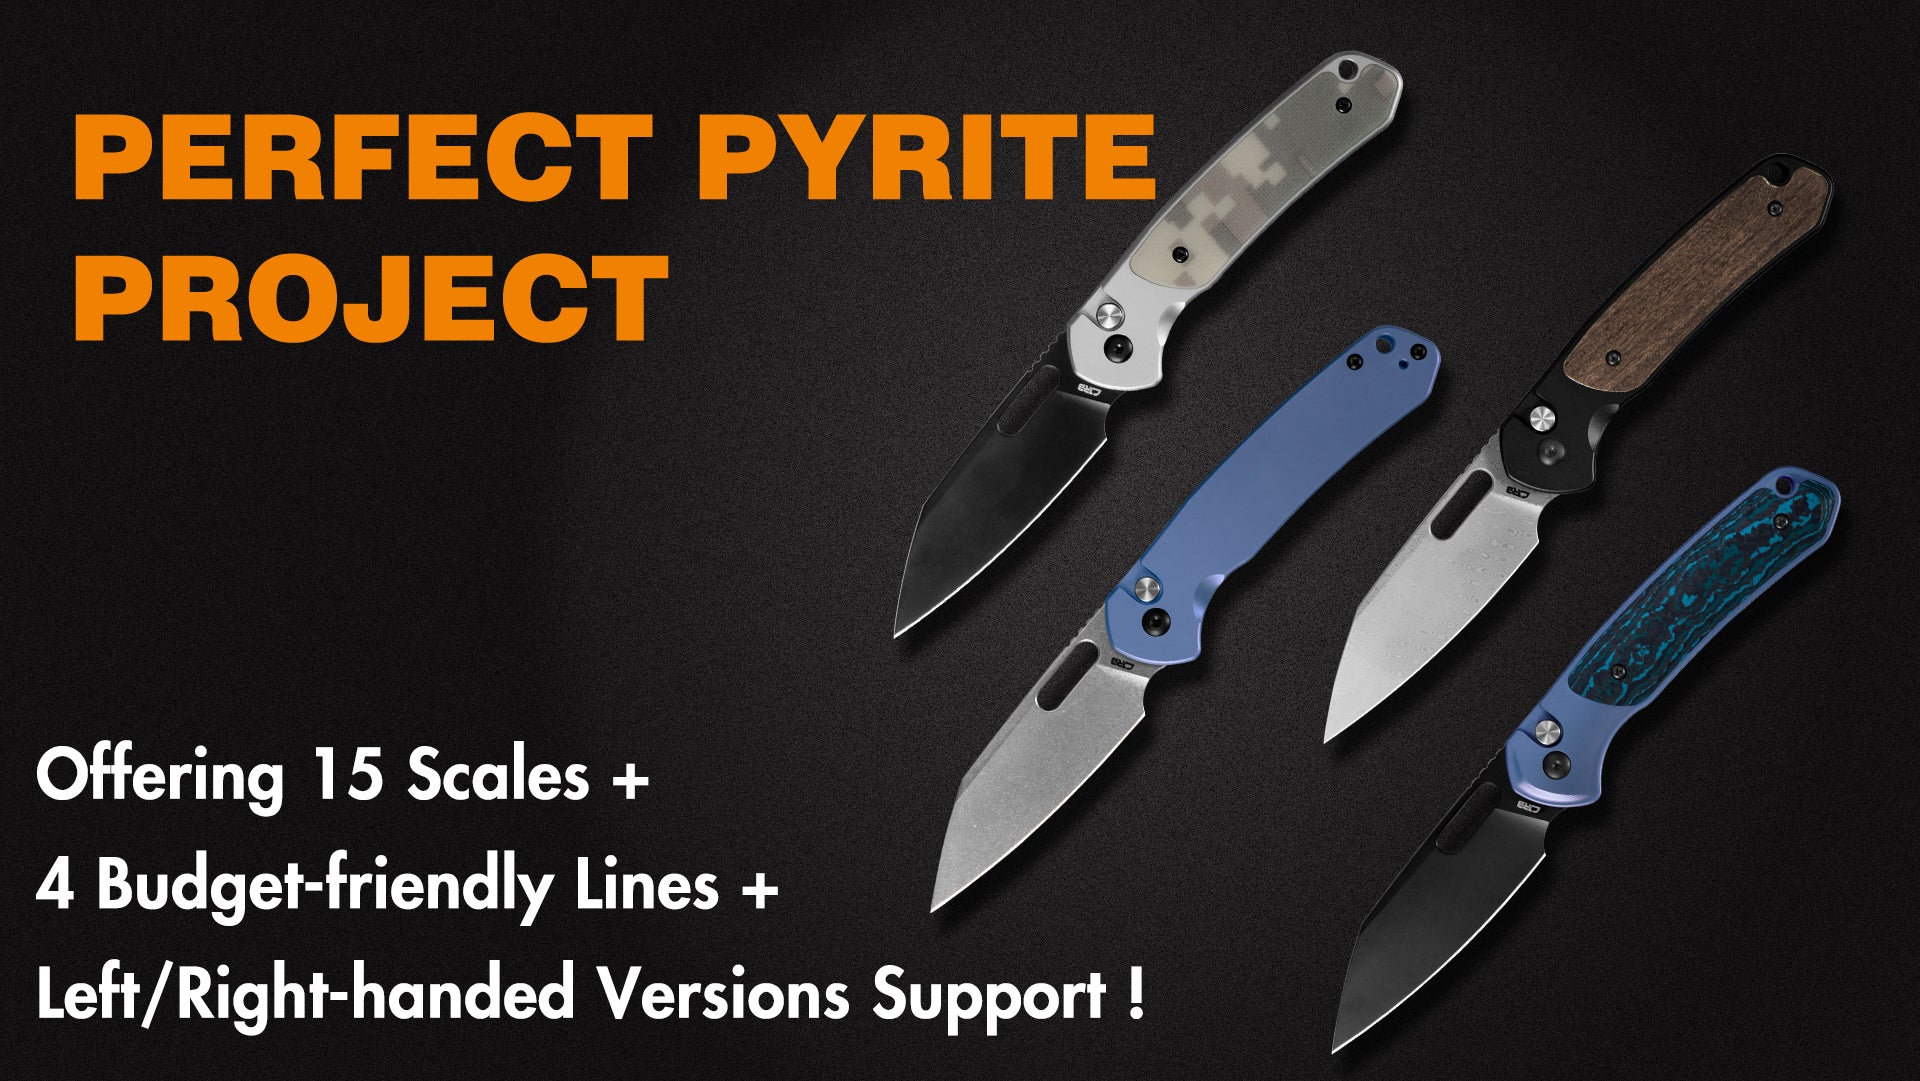 Picked up the Pyrite from the Prime Day deals! Such a sweet knife